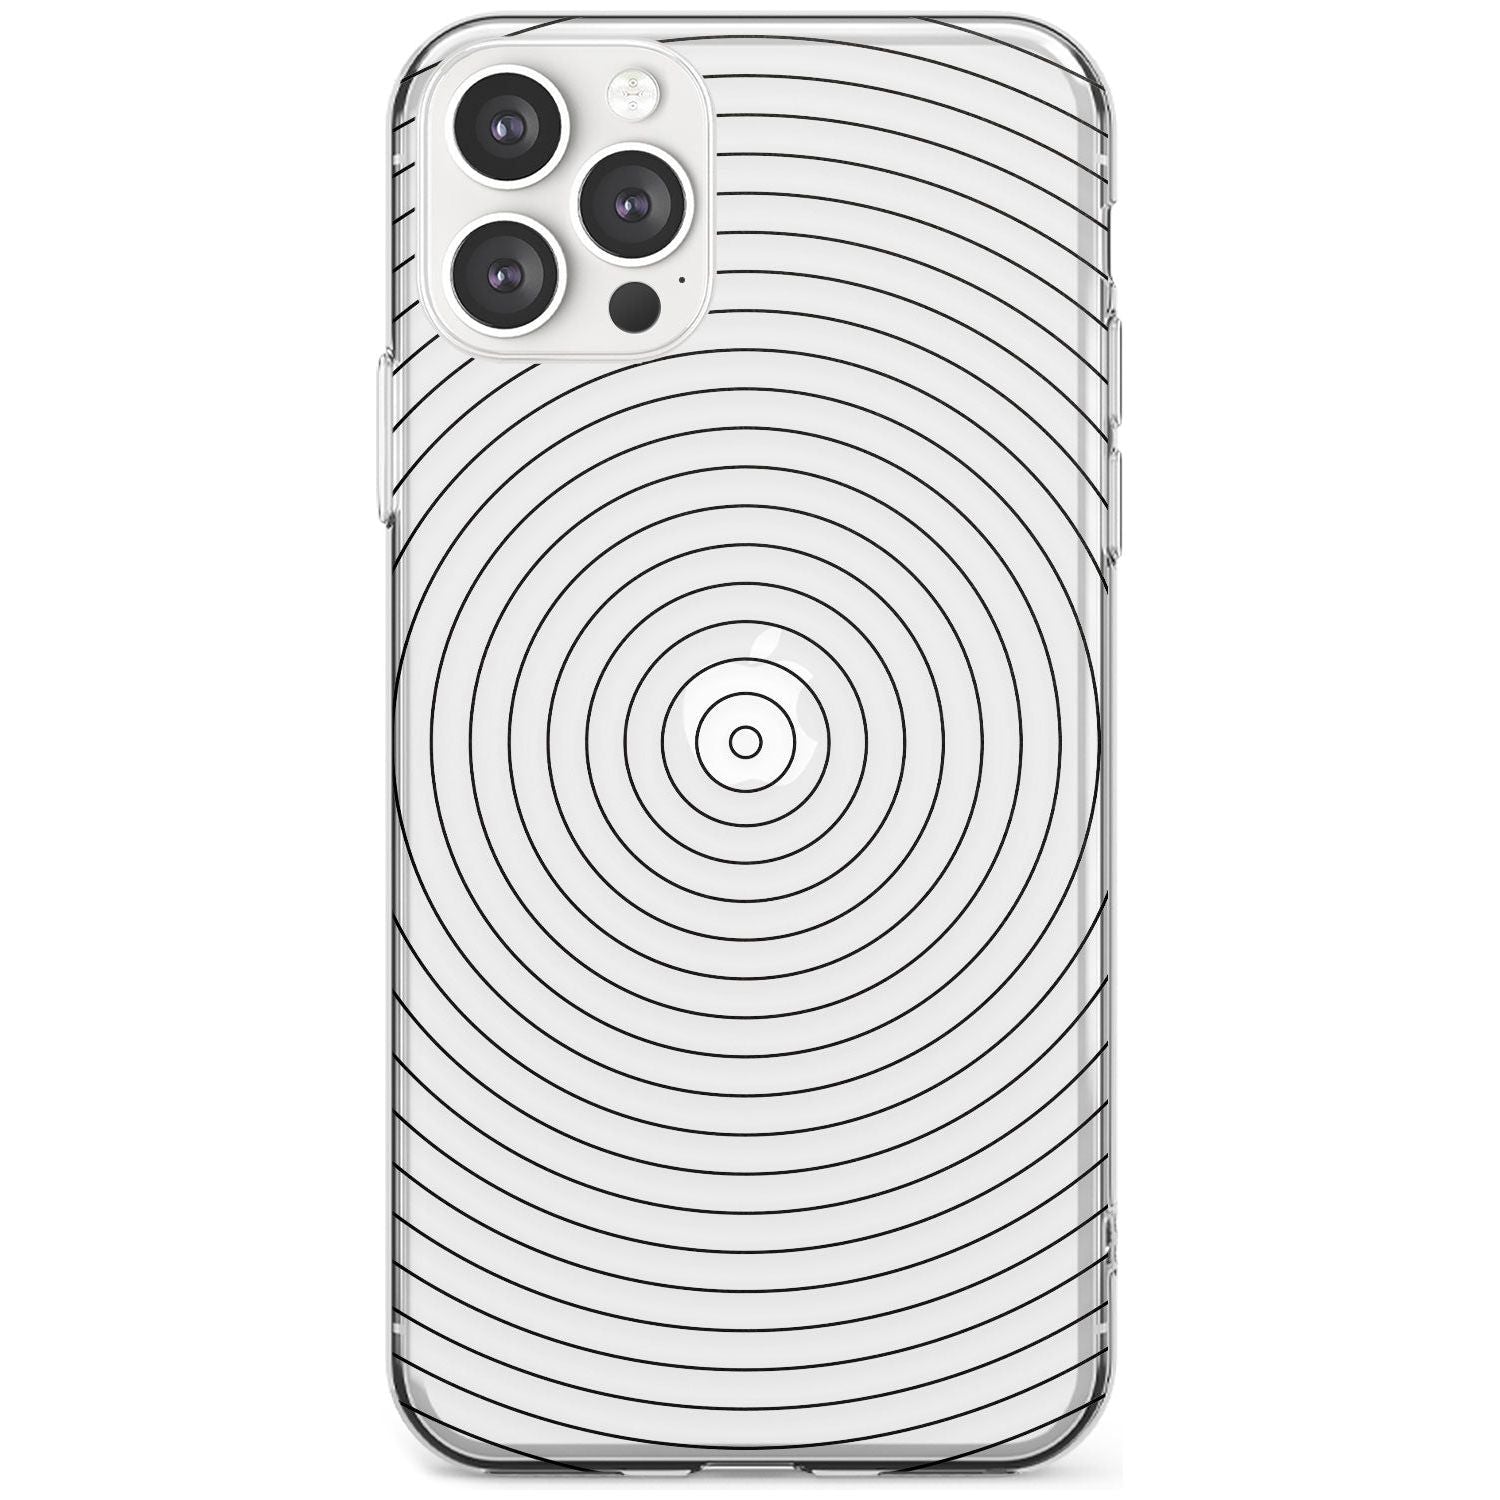 Abstract Lines: Circles Black Impact Phone Case for iPhone 11 Pro Max